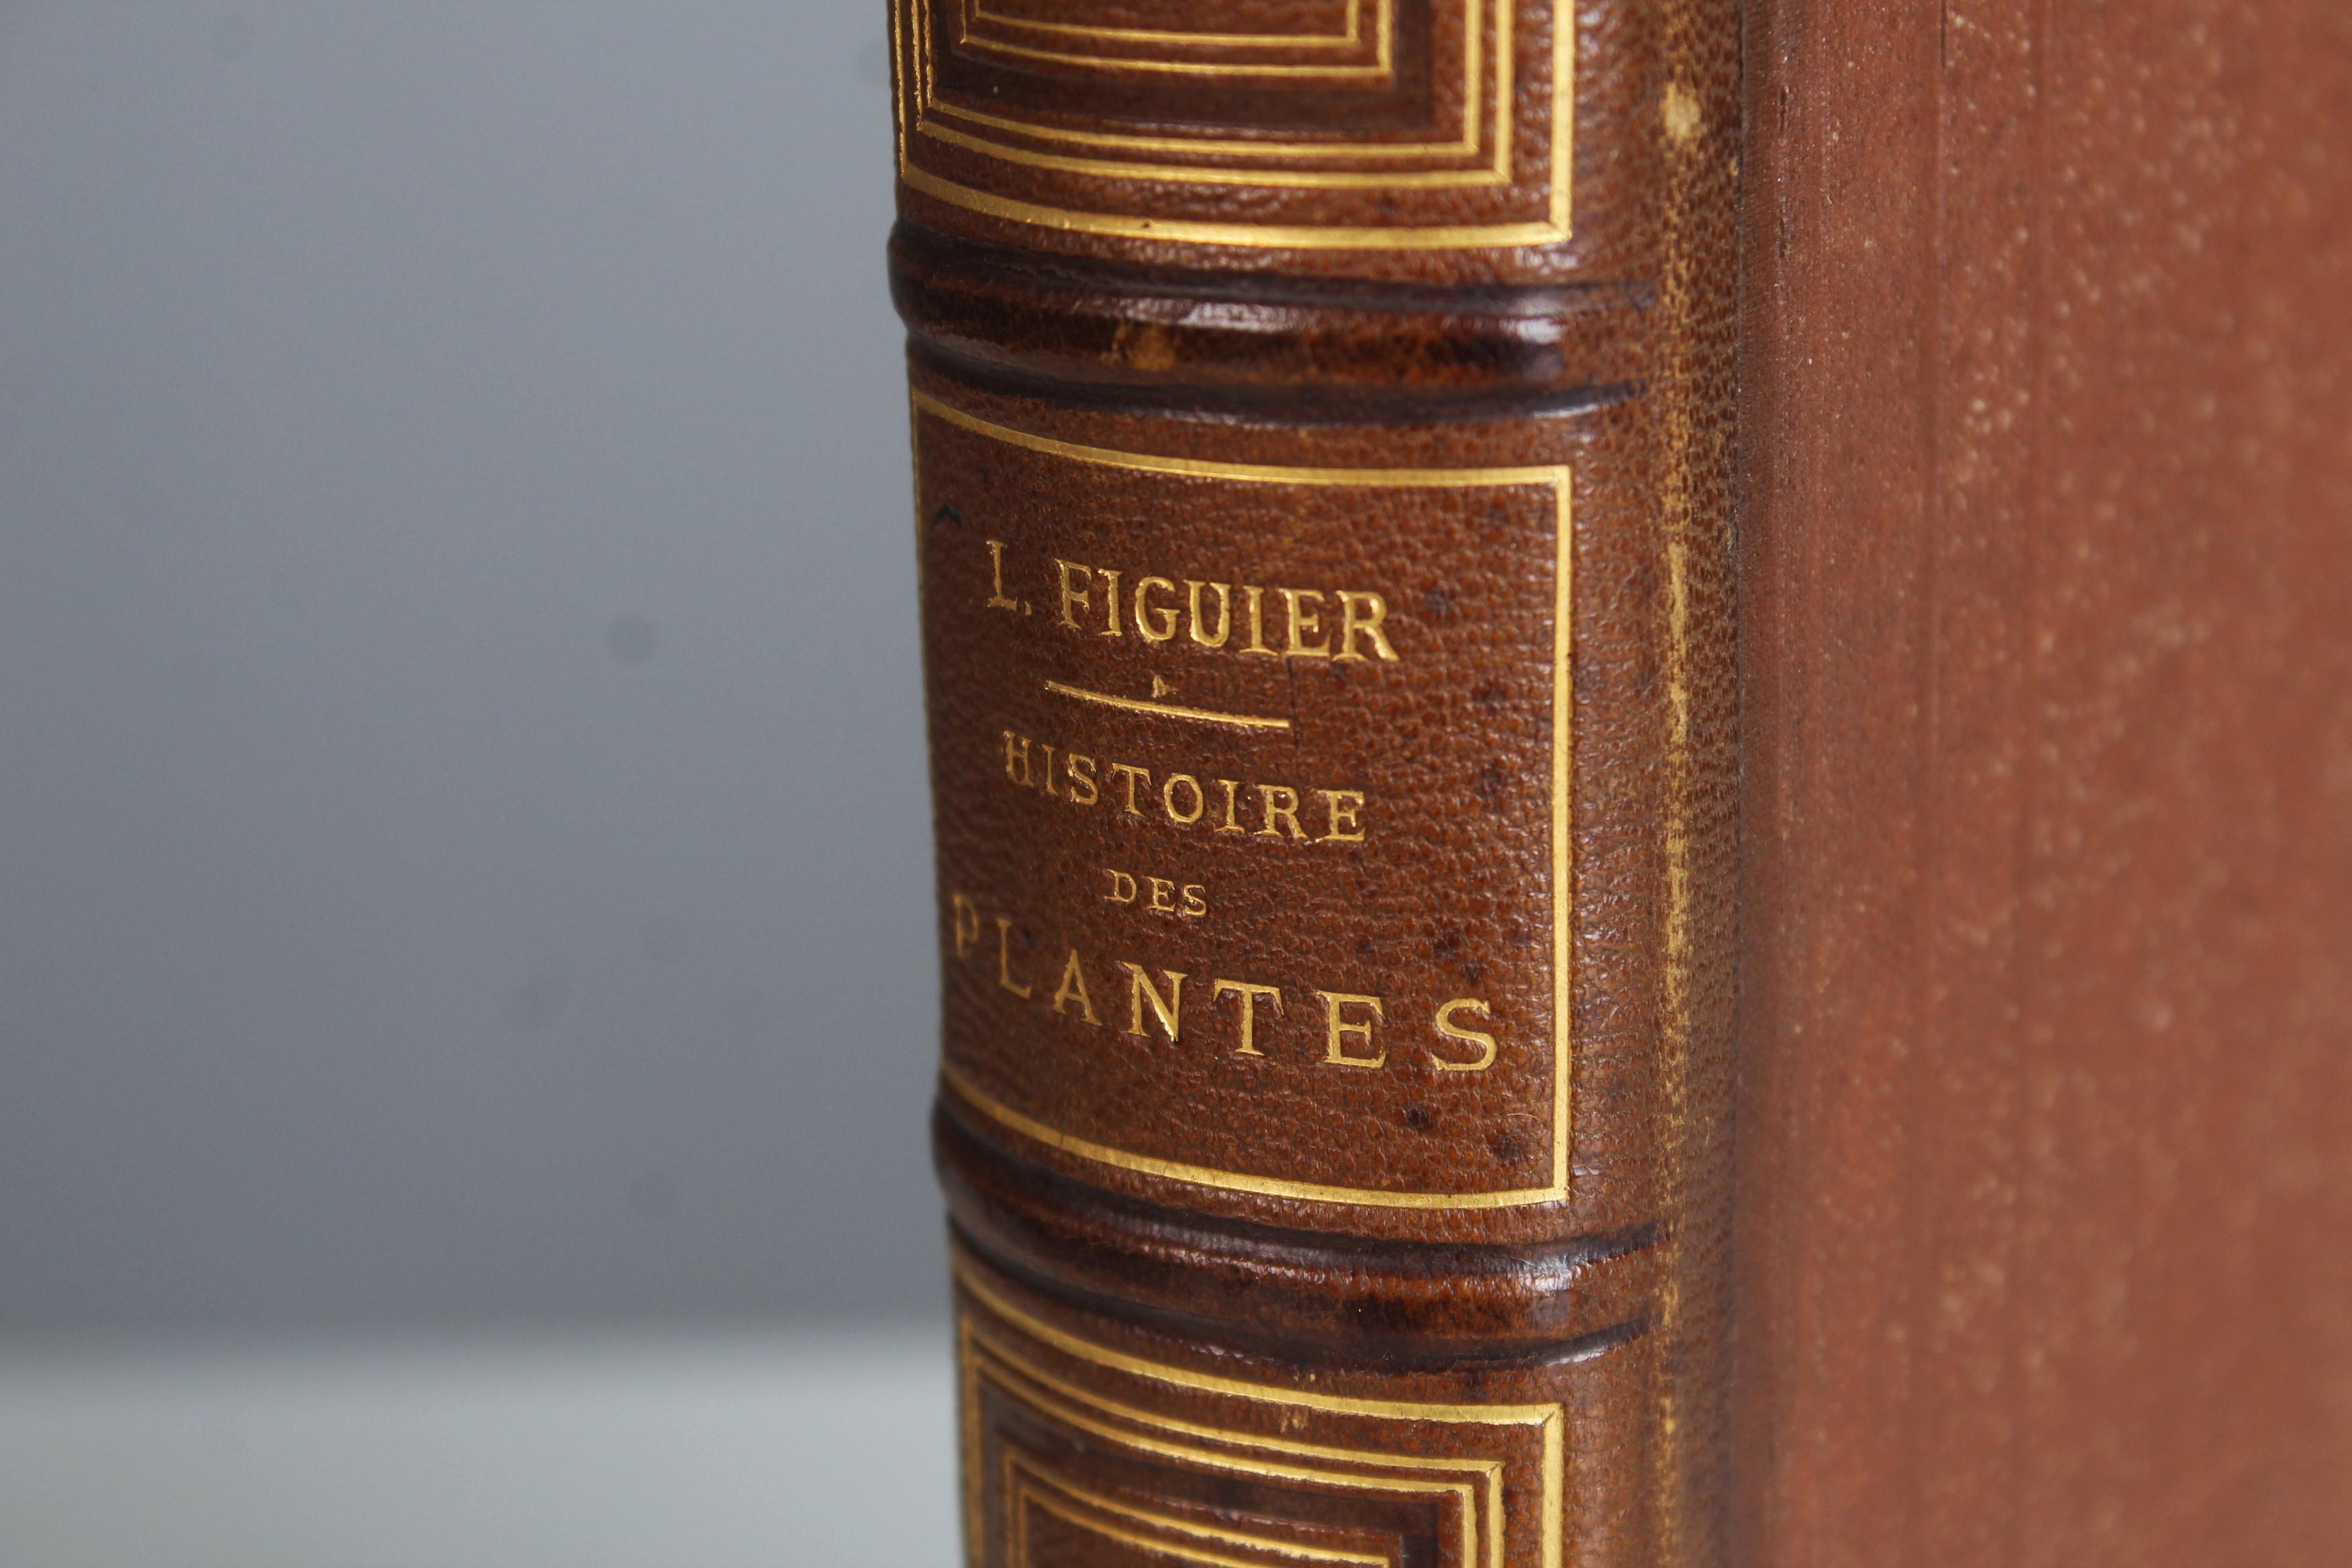 French Antique Leather Book 